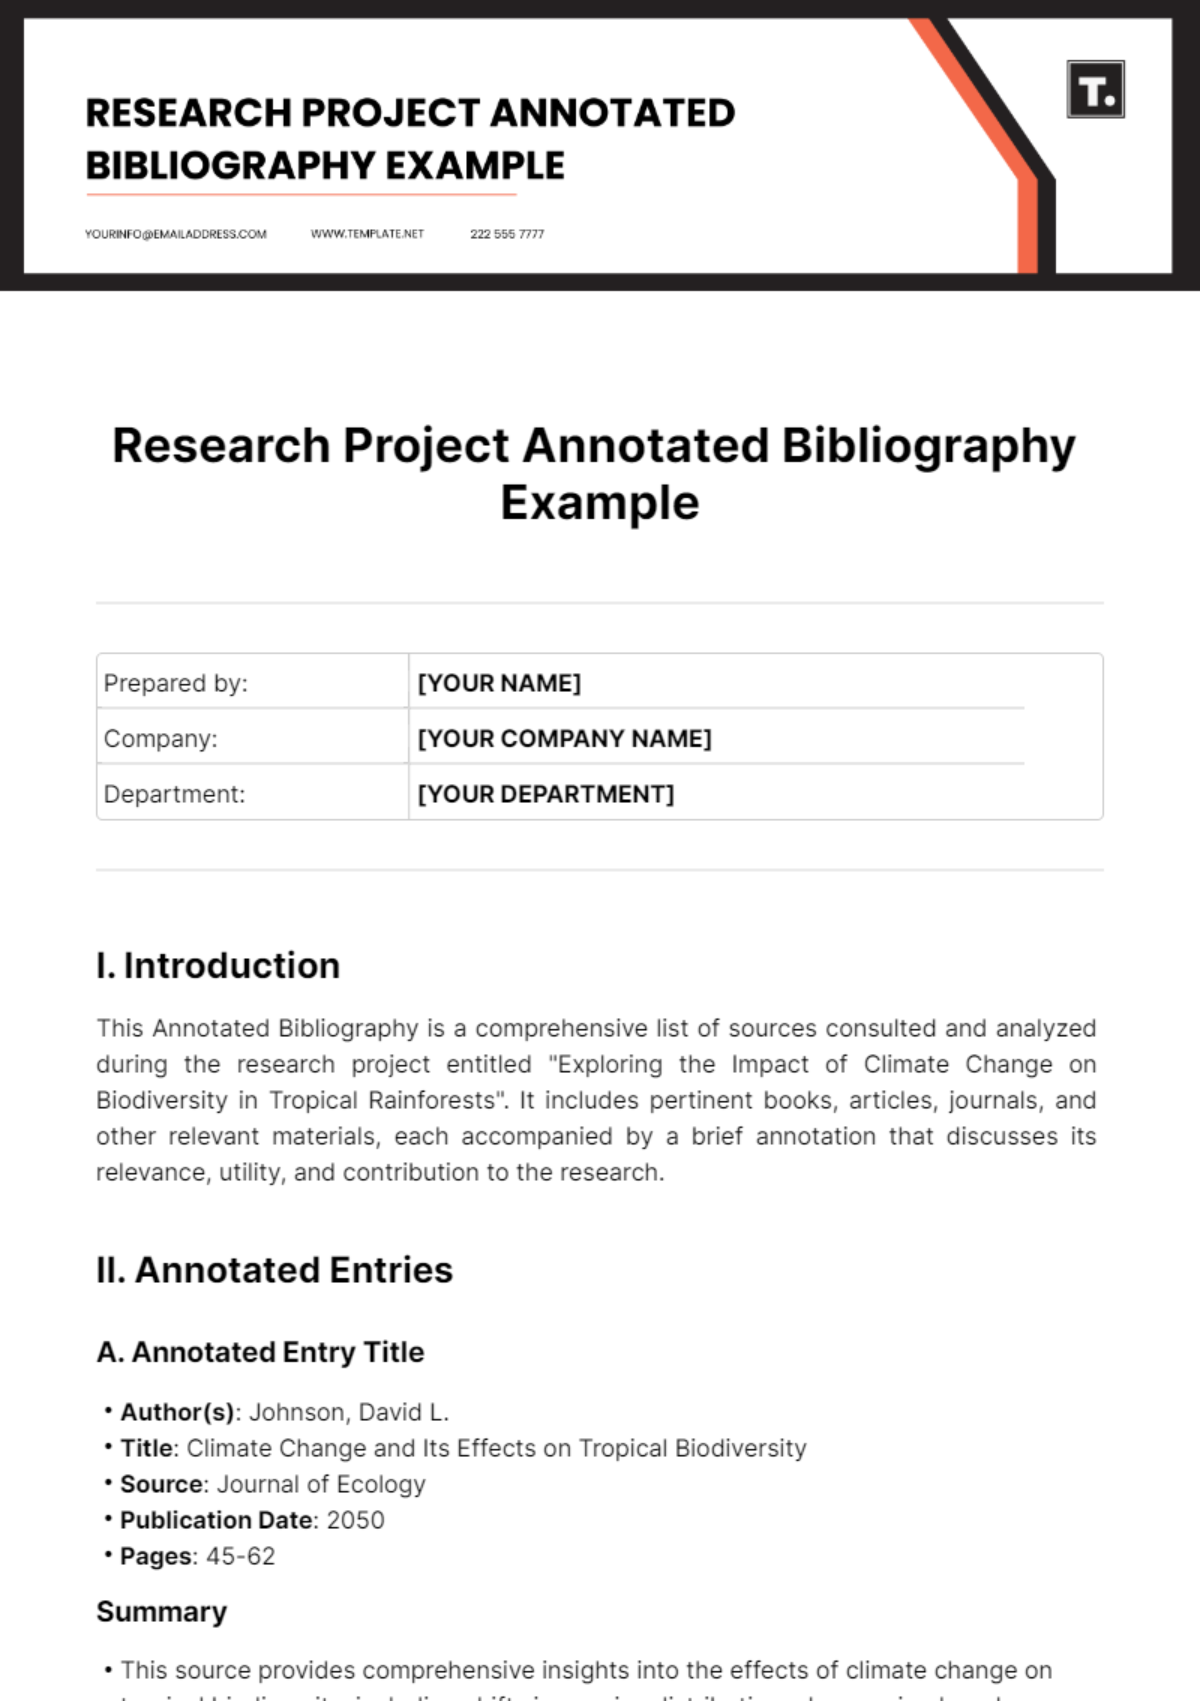 Free Research Project Annotated Bibliography Example Template